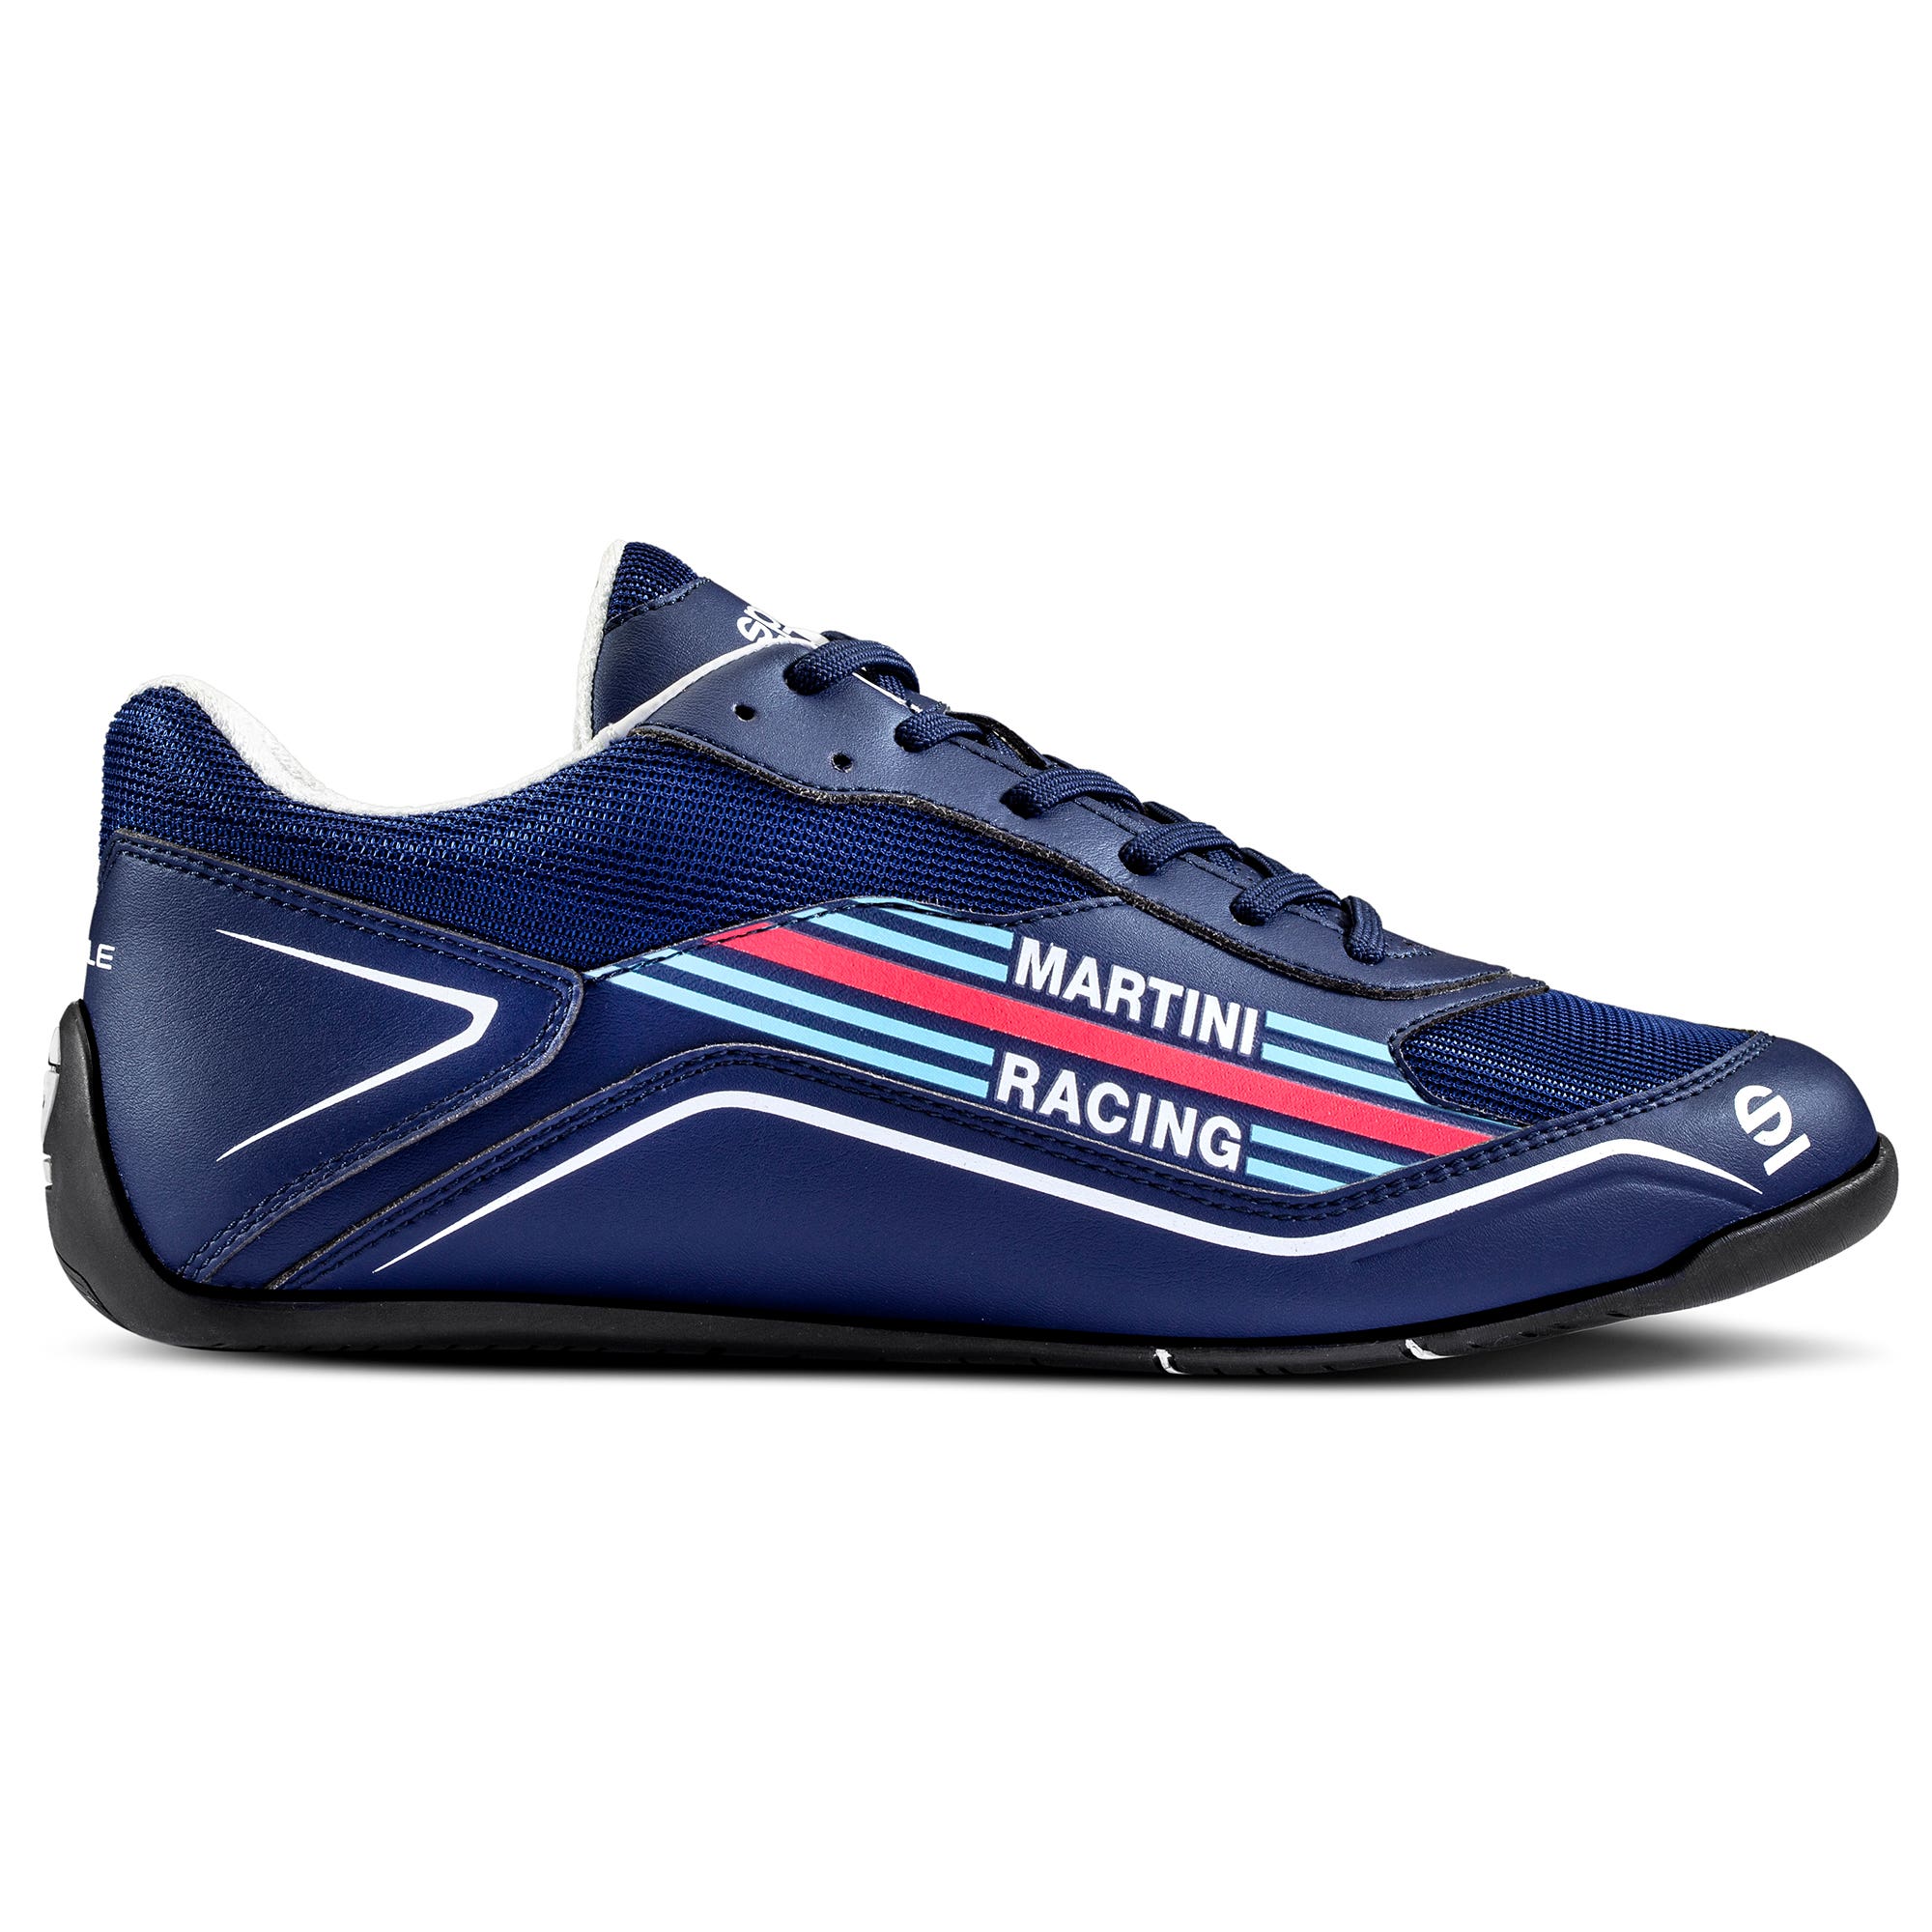 S-POLE SNEAEKERS MARTINI RACING - Sparco Shop